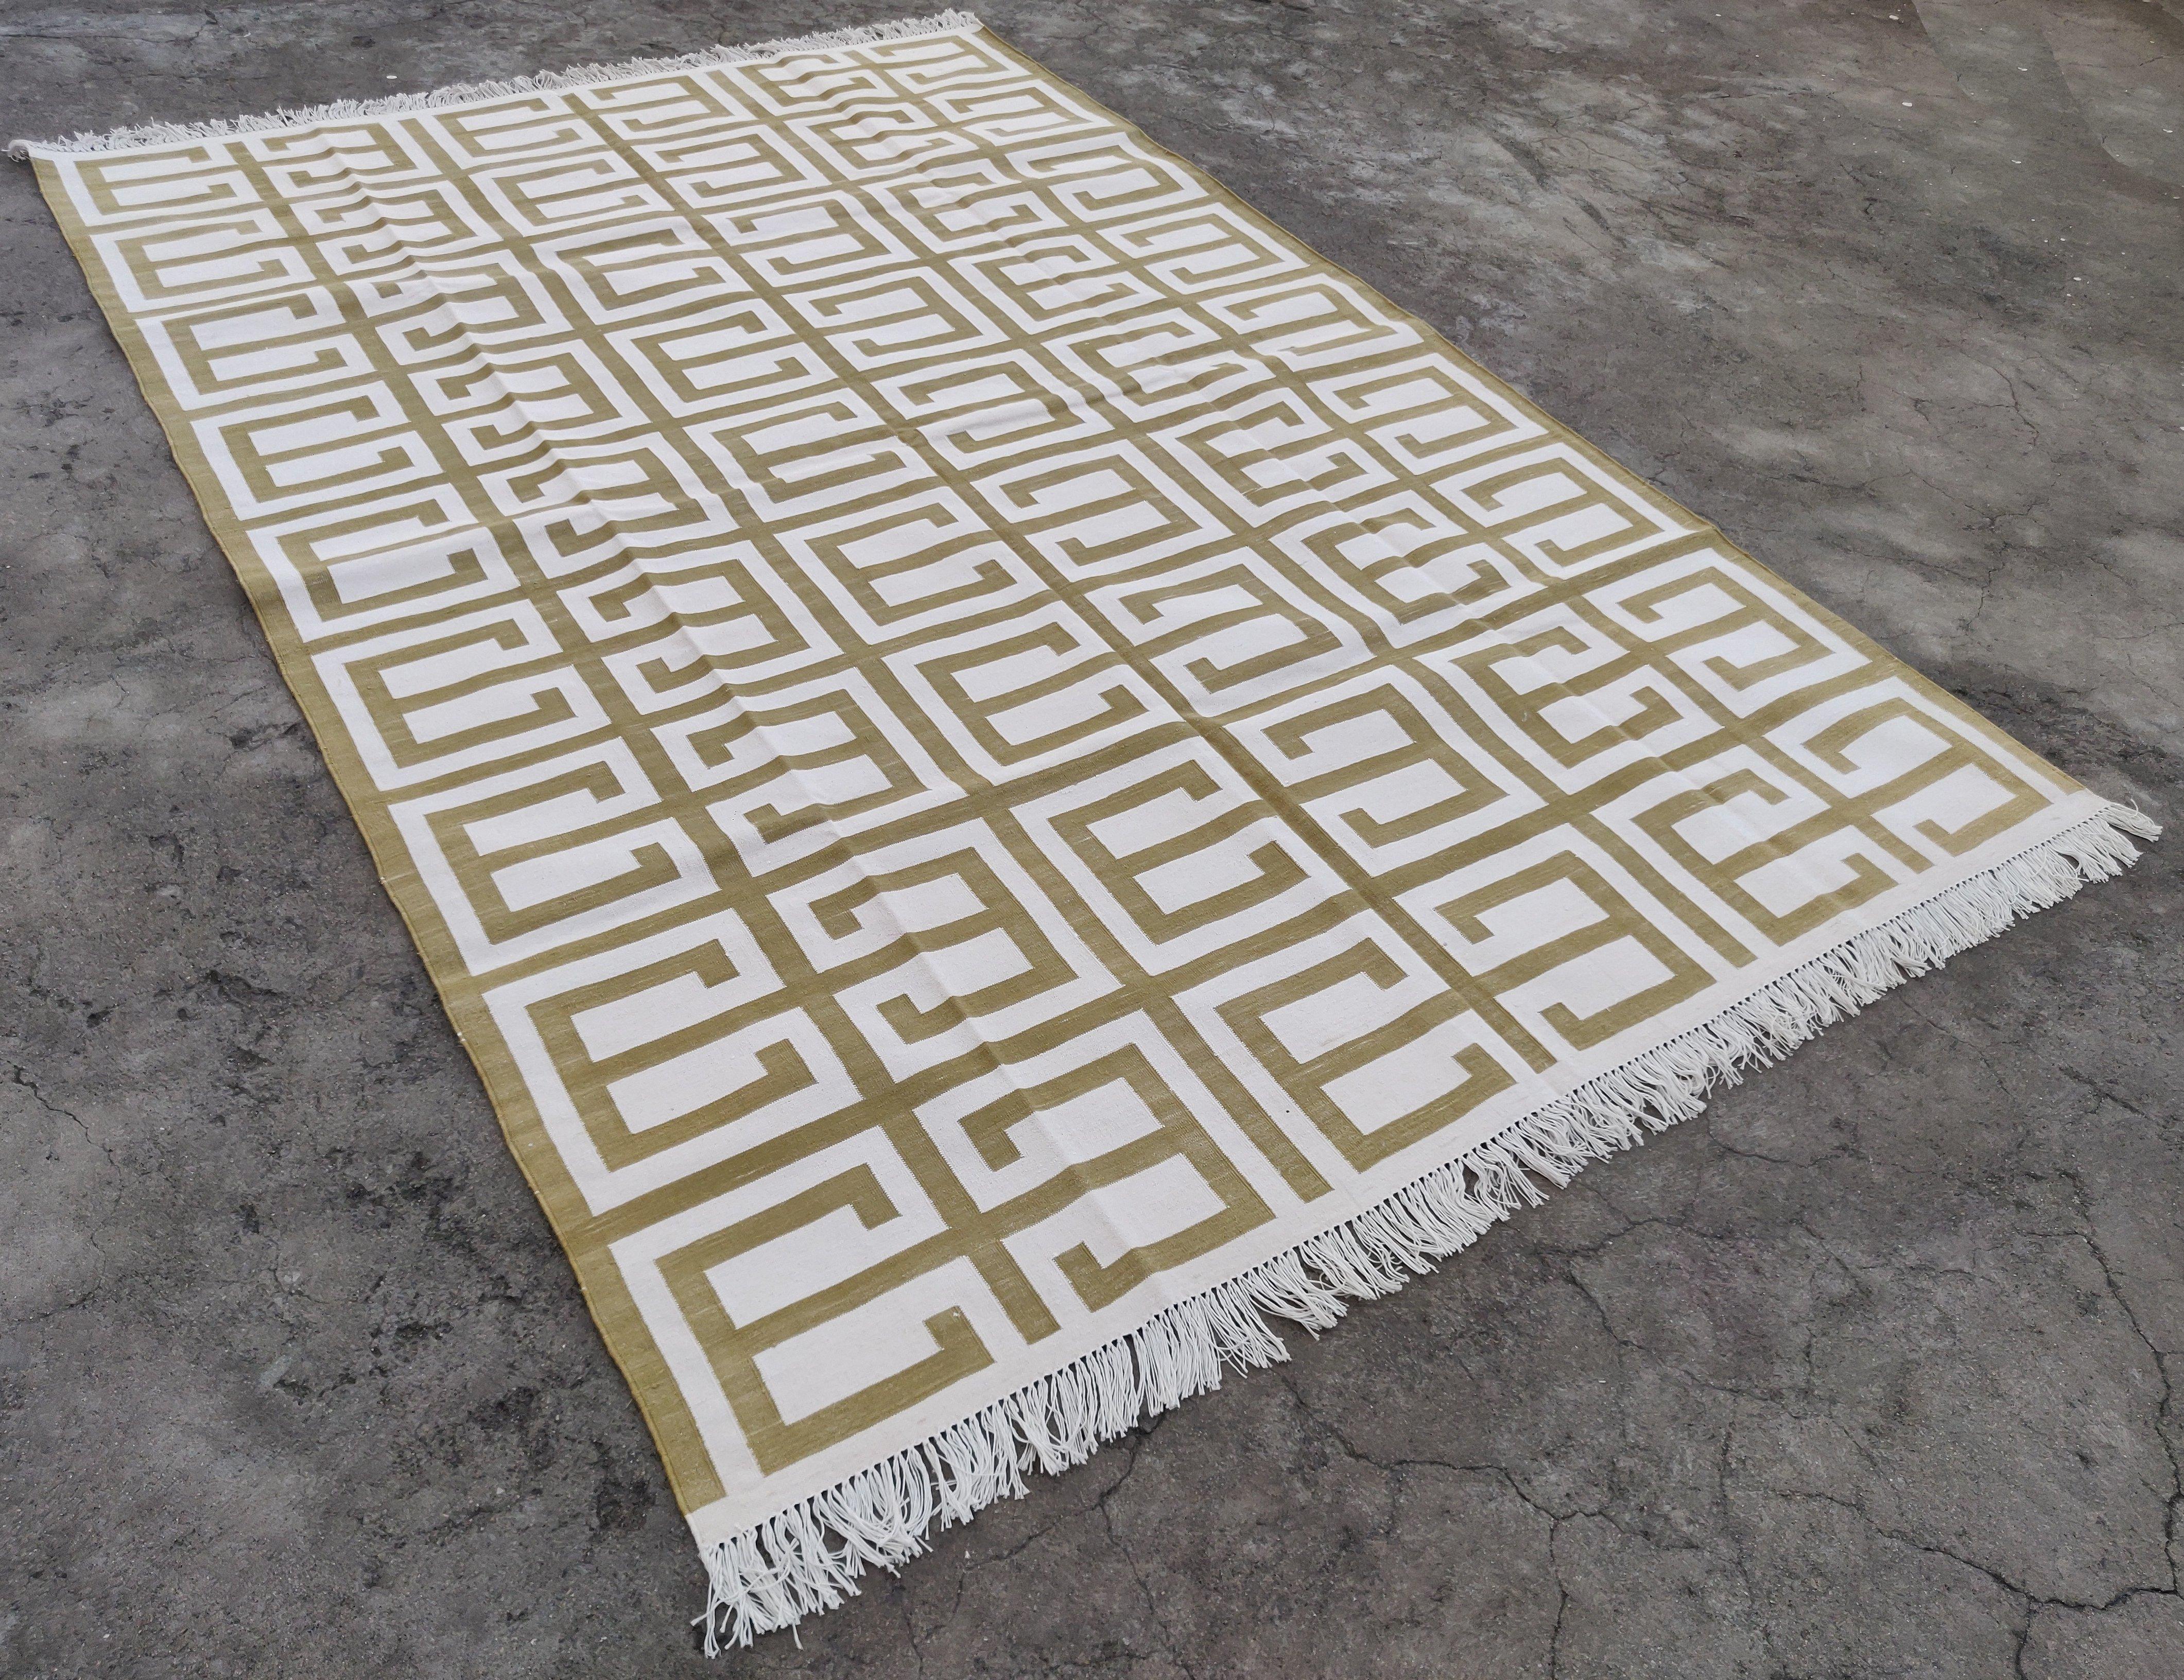 Cotton Vegetable Dyed Olive Green And Cream Geometric Indian Dhurrie Rug-6'x9' 
These special flat-weave dhurries are hand-woven with 15 ply 100% cotton yarn. Due to the special manufacturing techniques used to create our rugs, the size and color of